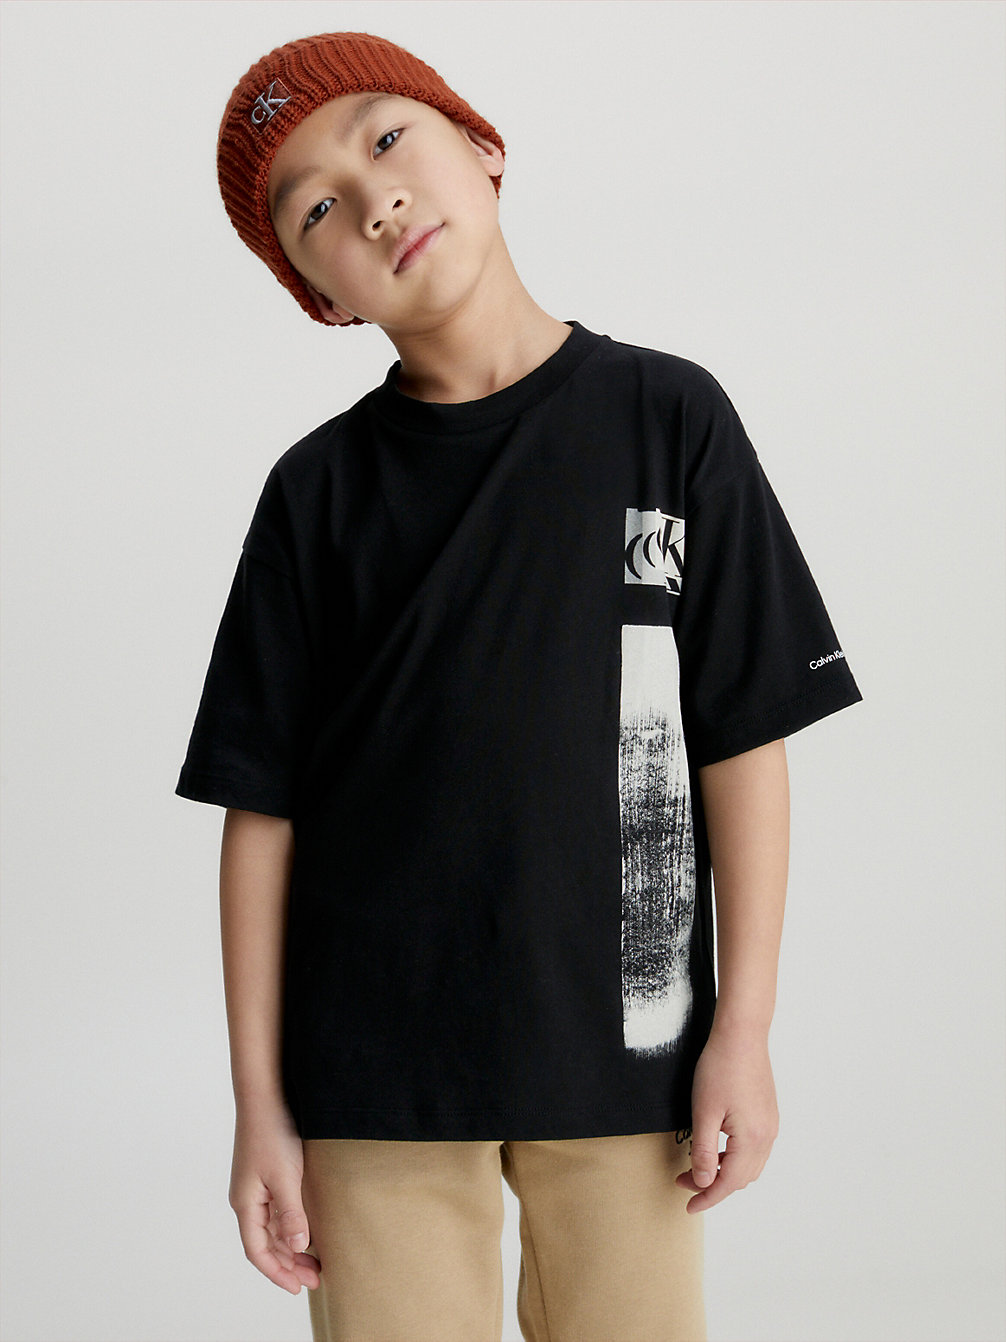 CK BLACK Relaxed Glitch Graphic T-Shirt undefined boys Calvin Klein